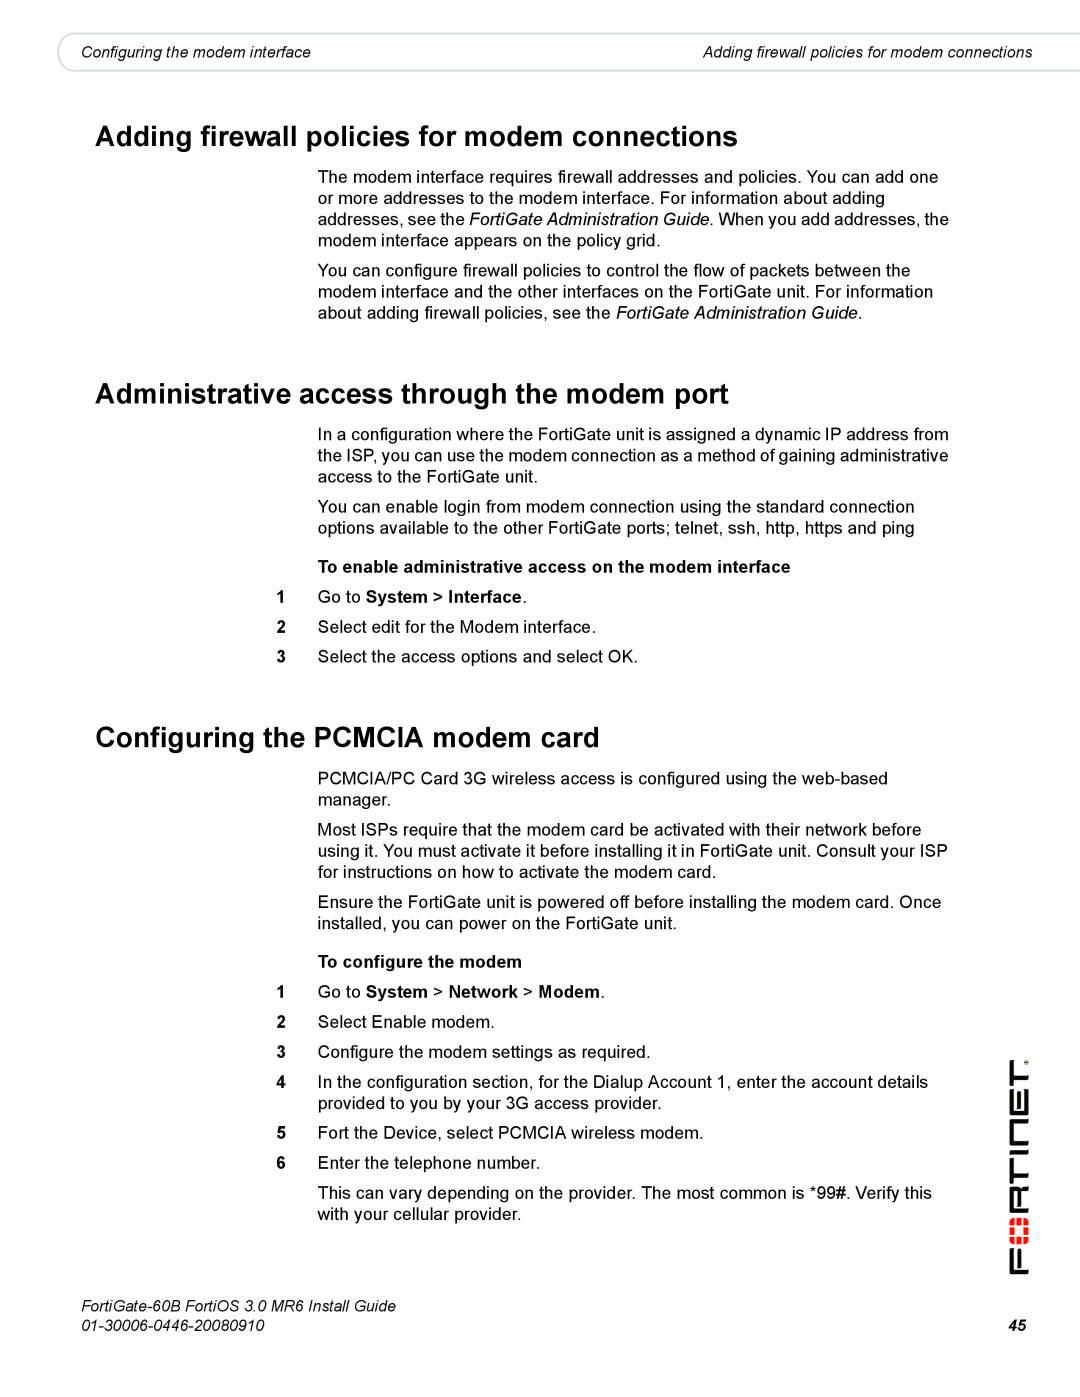 Fortinet 60B manual Adding firewall policies for modem connections, Administrative access through the modem port 